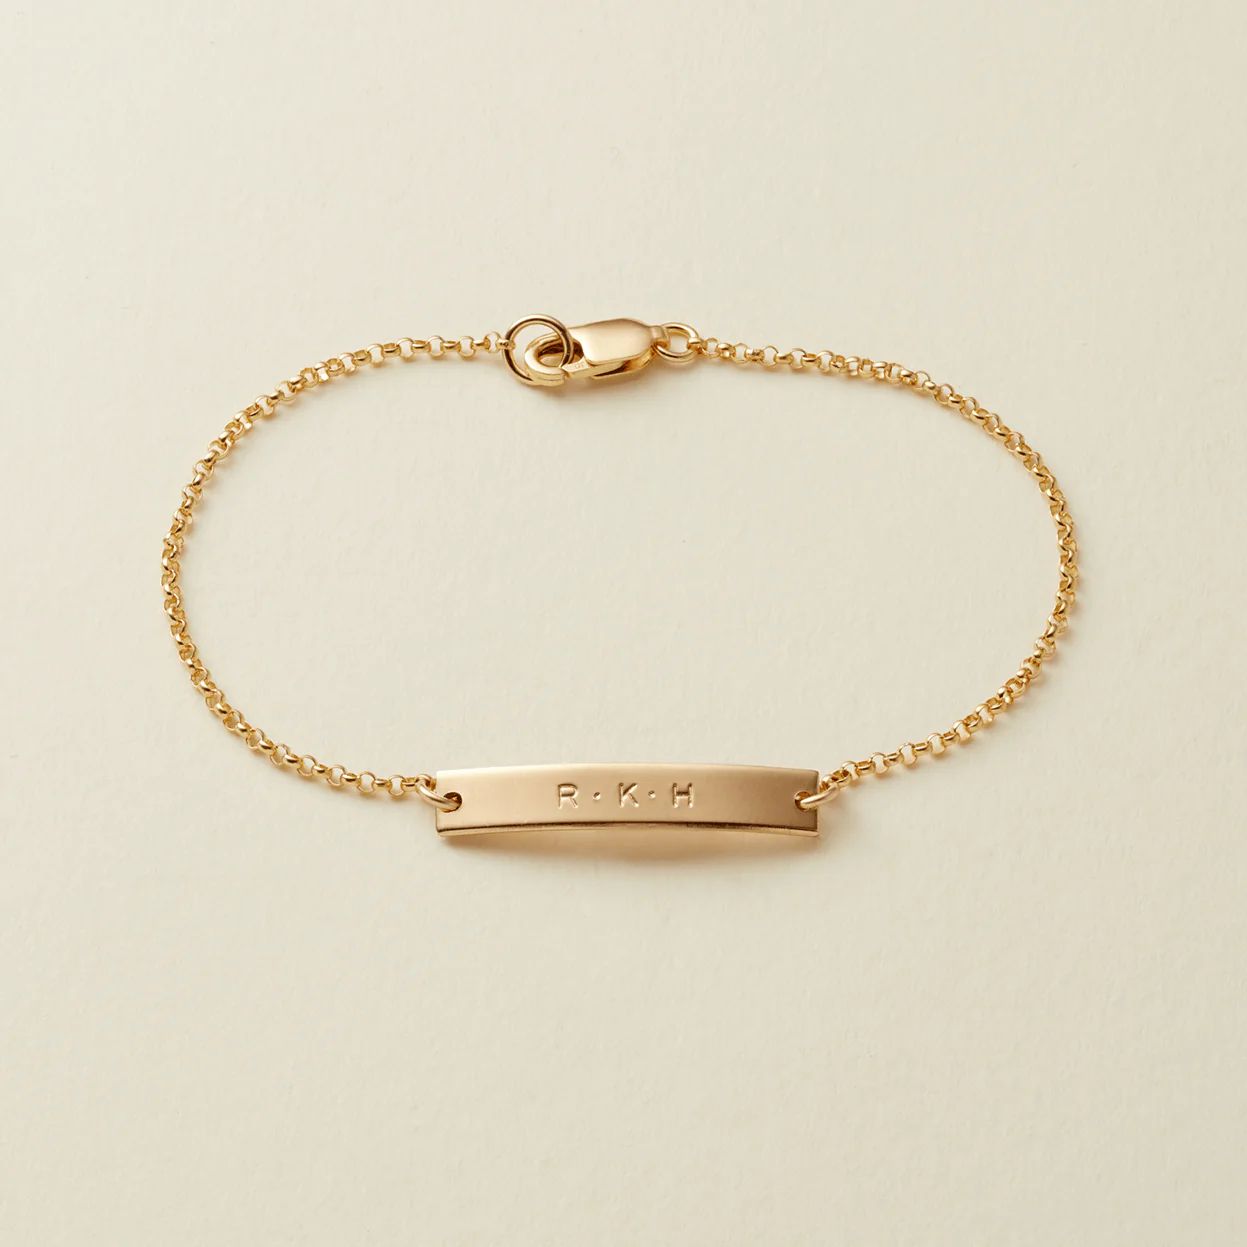 Made By Mary Mini Bar Bracelet—1" Bar | Hand Stamped, Dainty, Minimal | Made by Mary (US)